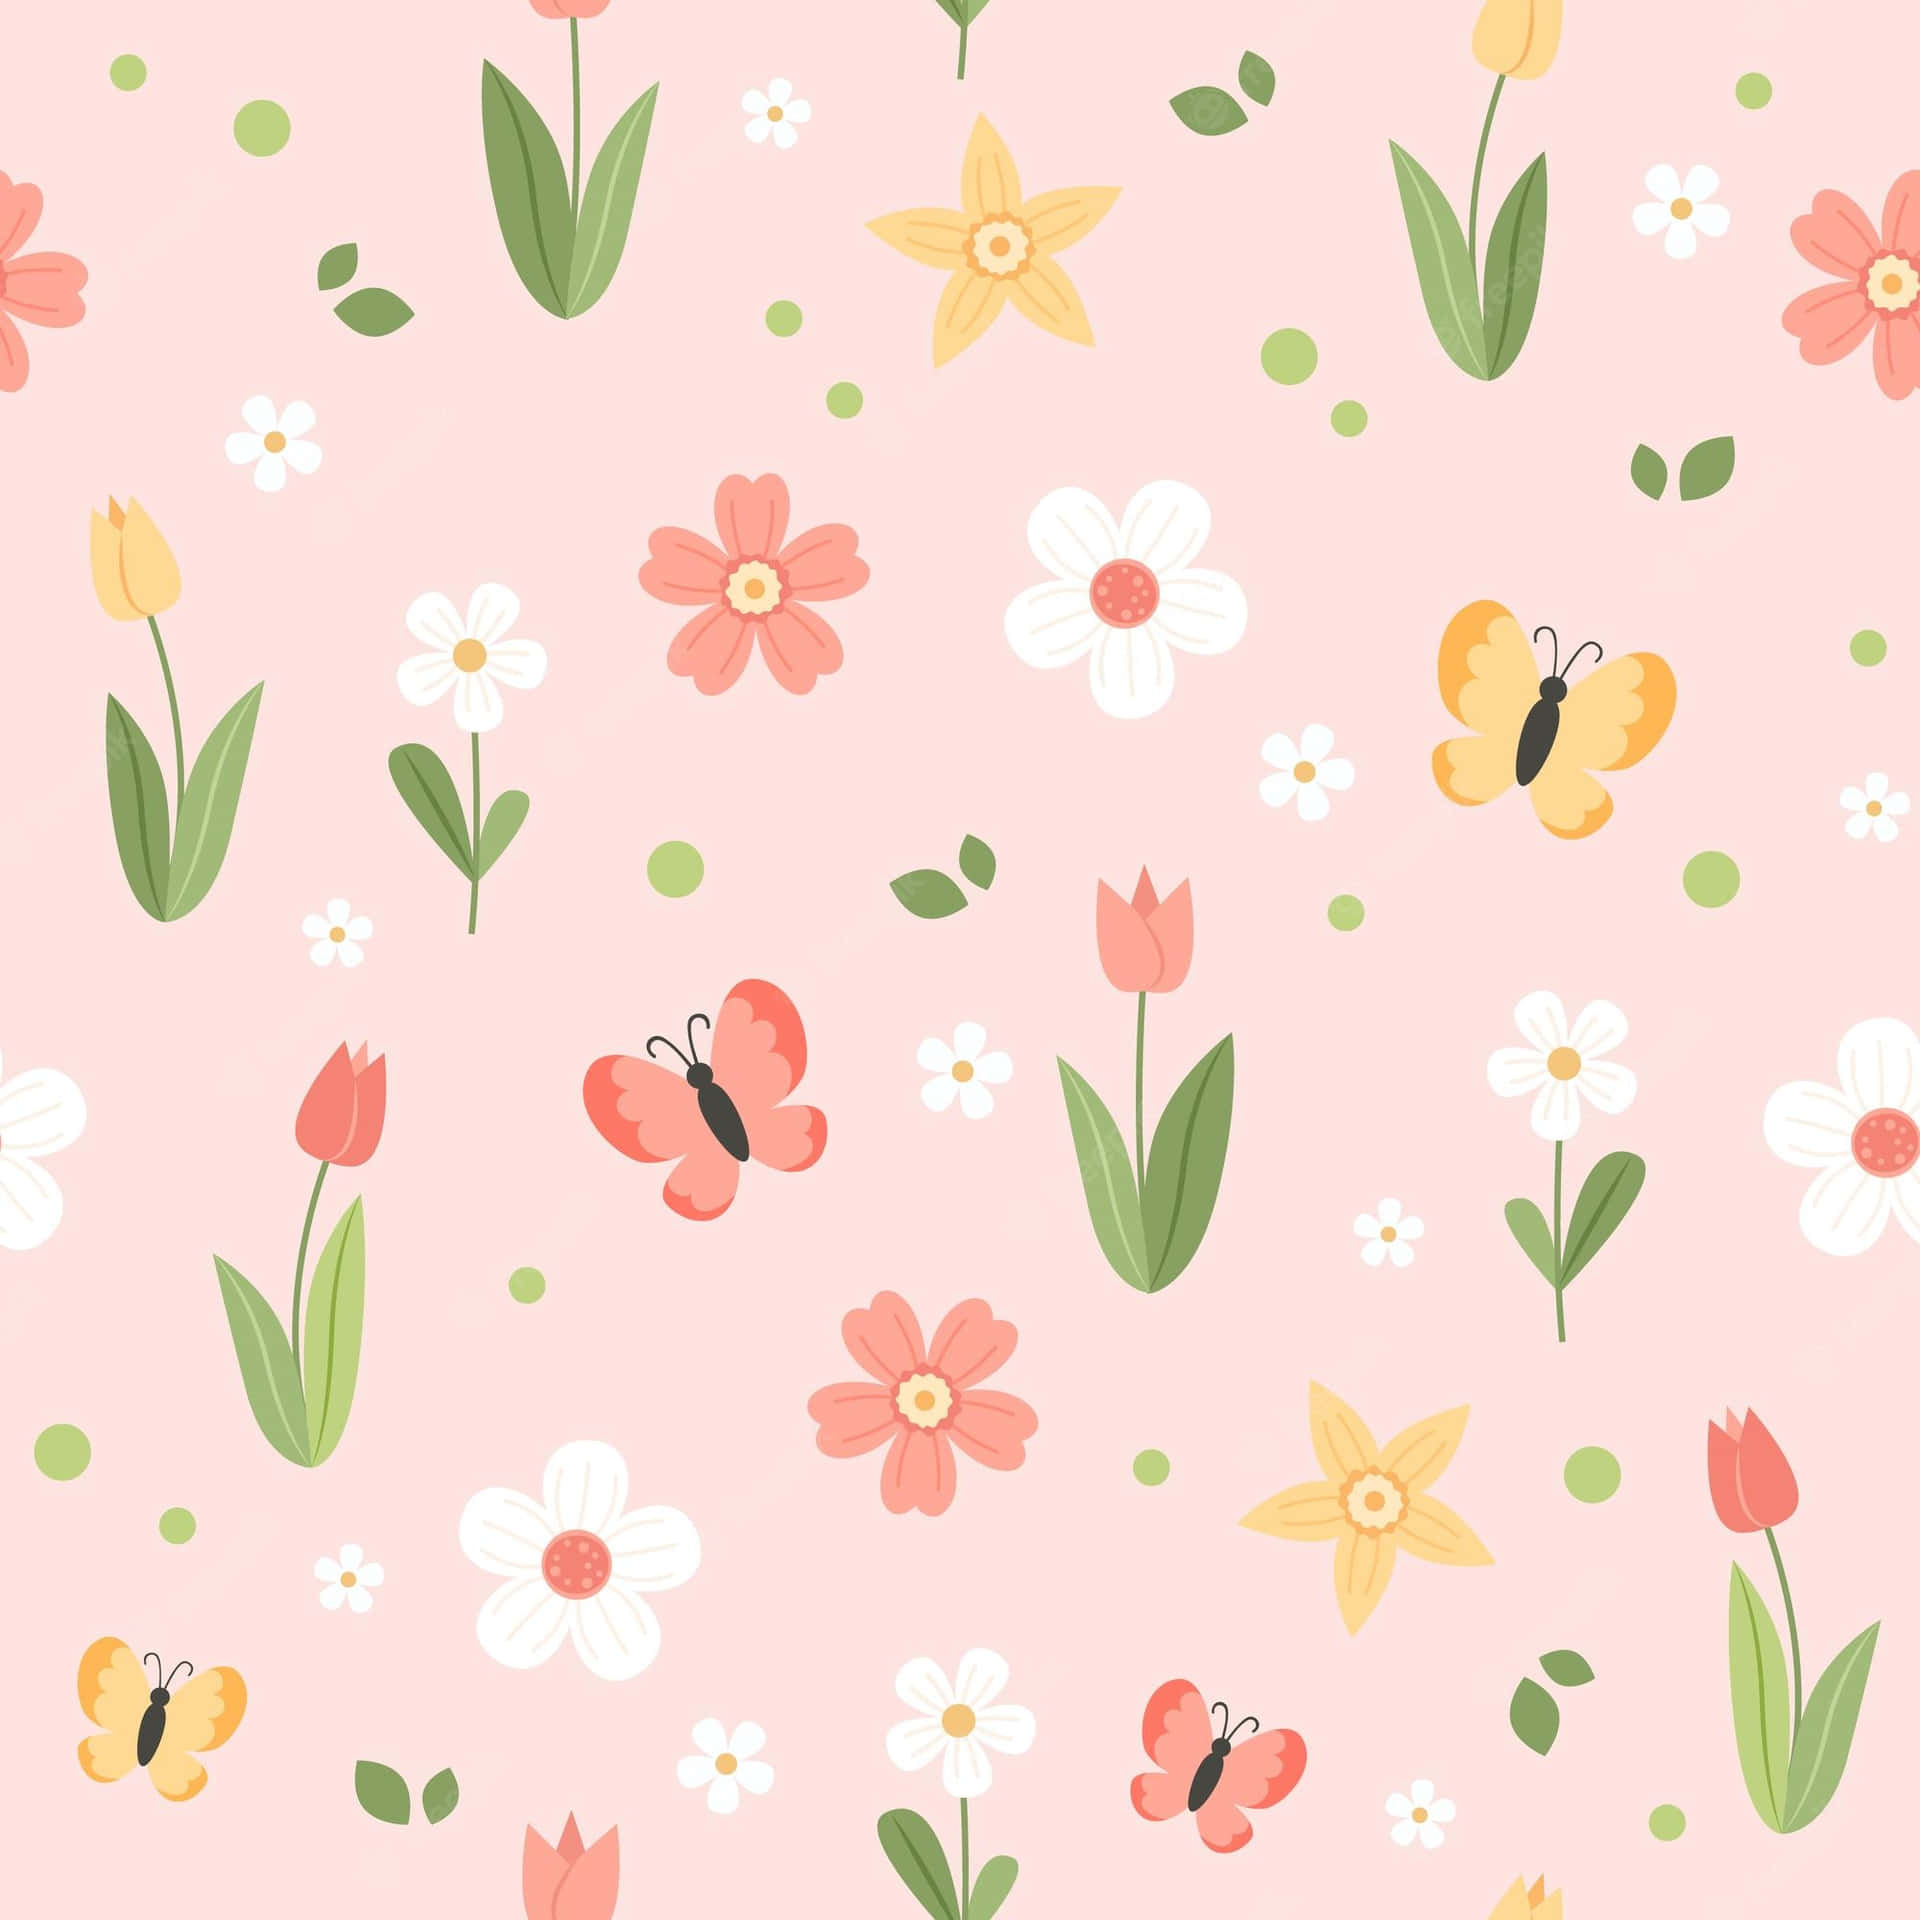 Captivating Blossoms: A Soothing Cute Flower Background